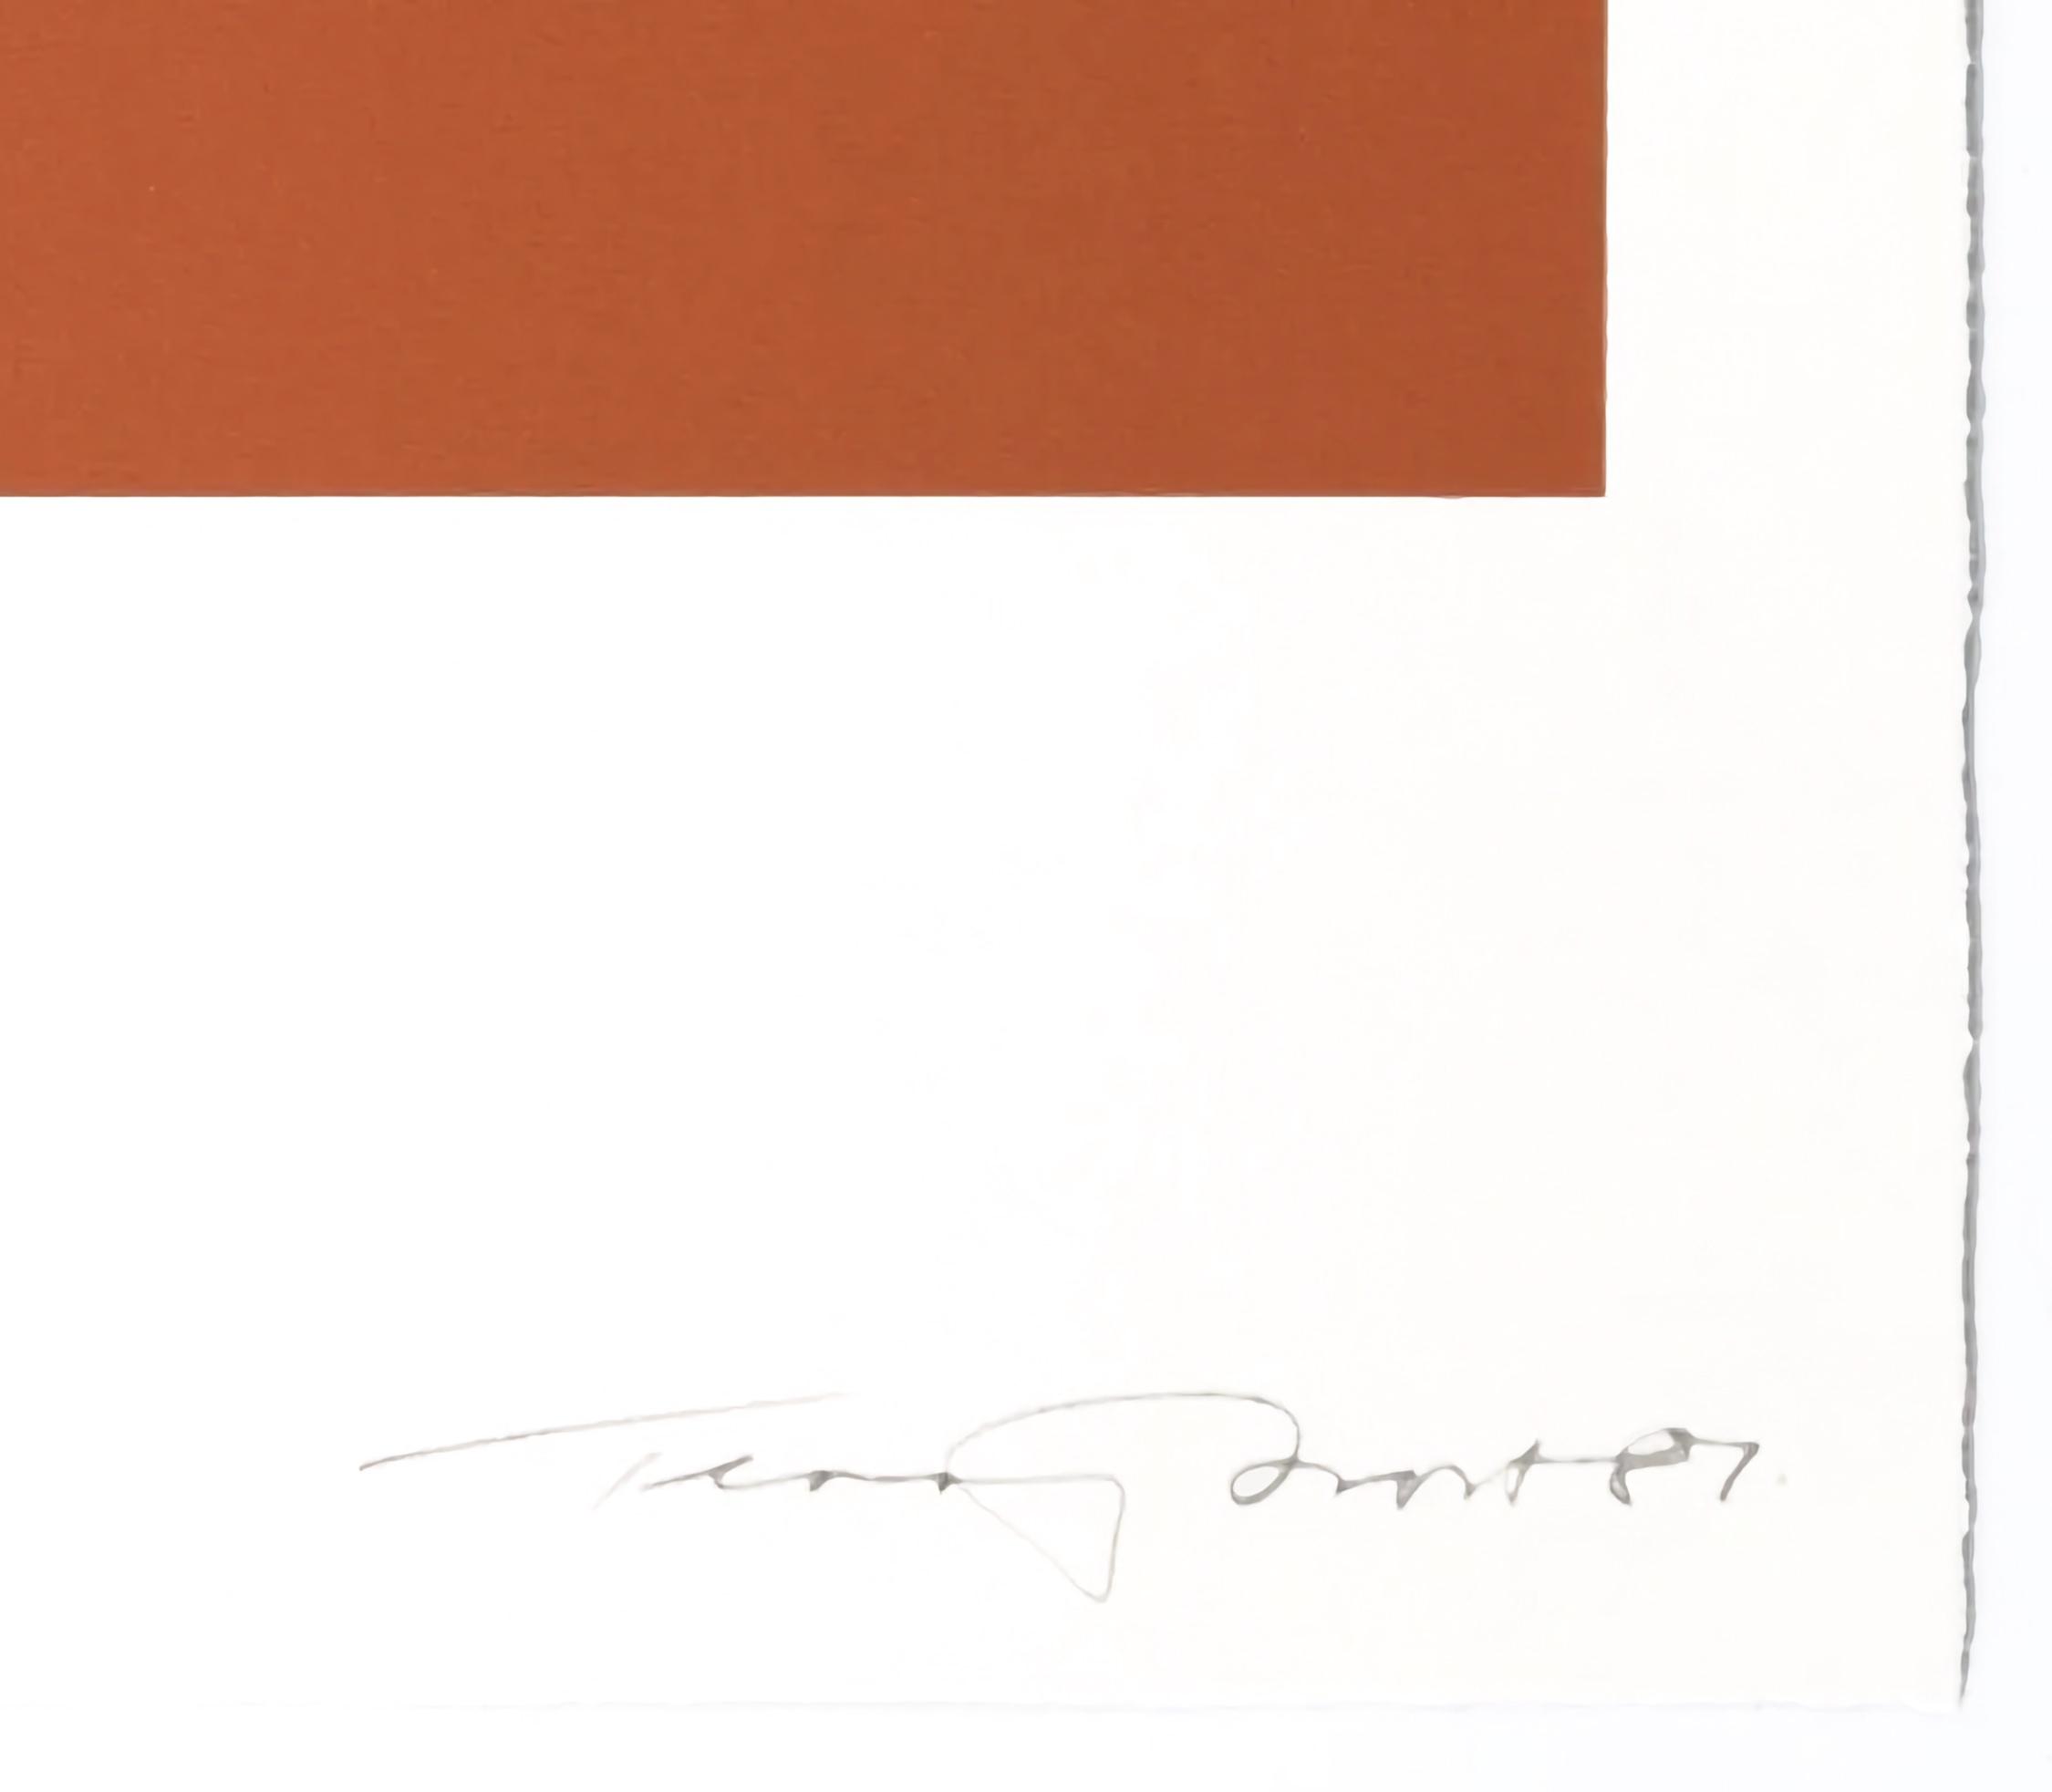 Terry Frost - Brown Blue and Black Descending